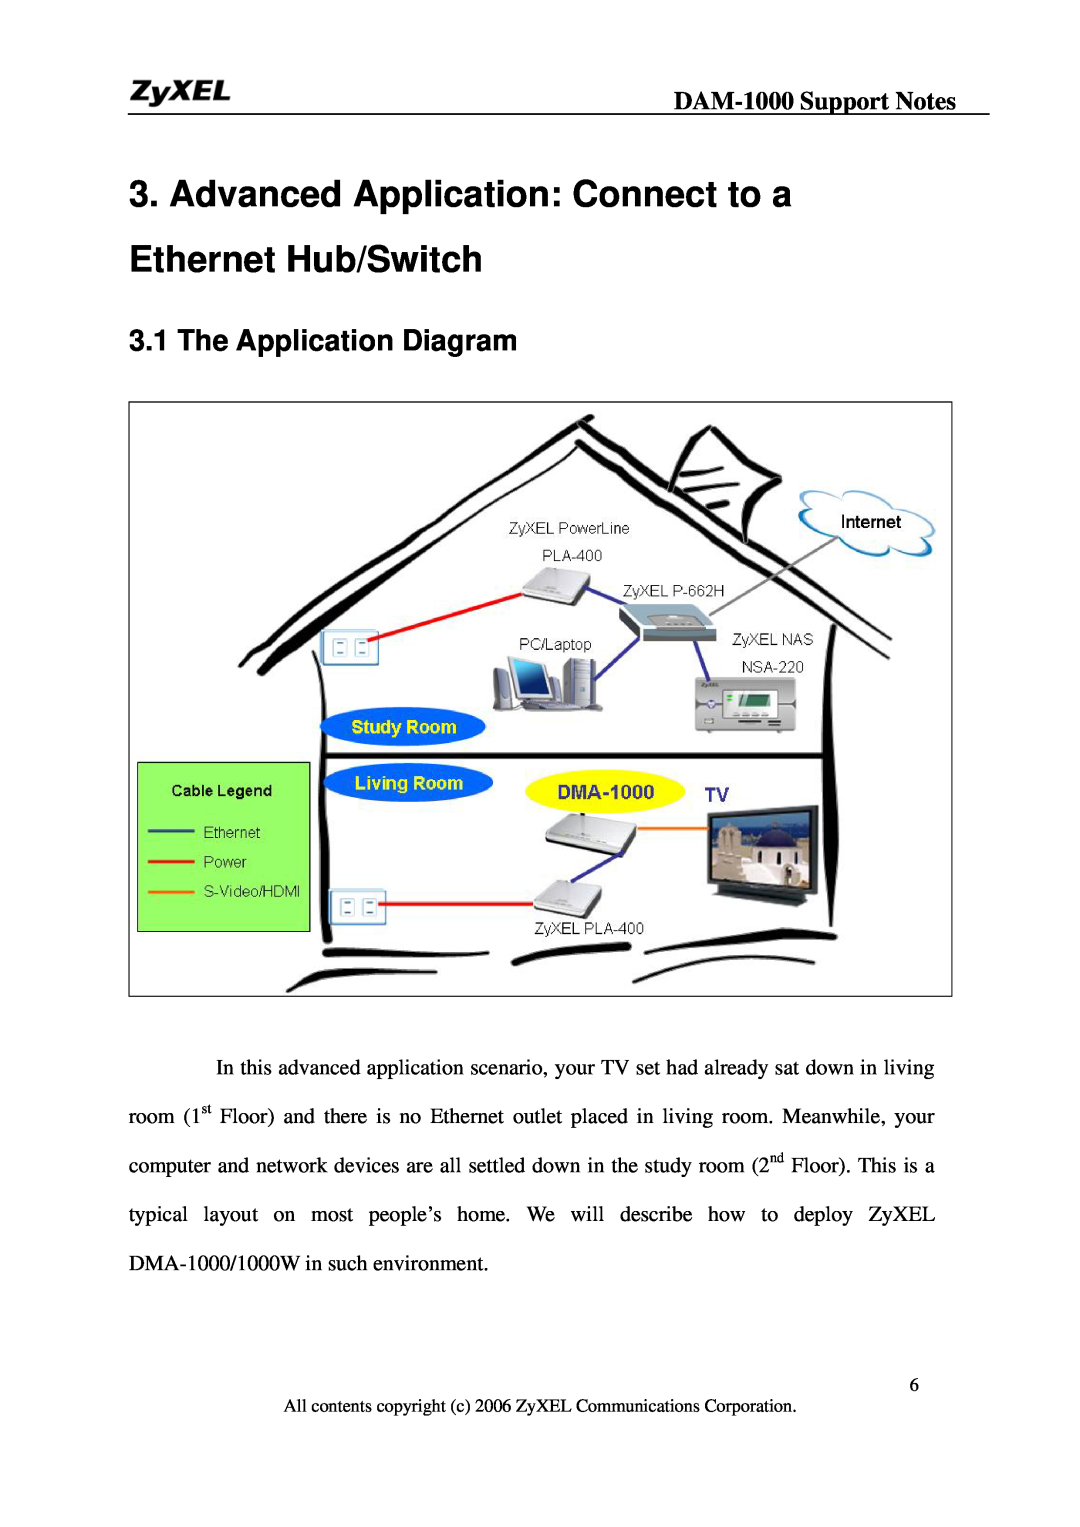 ZyXEL Communications DMA-1000W manual Advanced Application Connect to a Ethernet Hub/Switch, The Application Diagram 